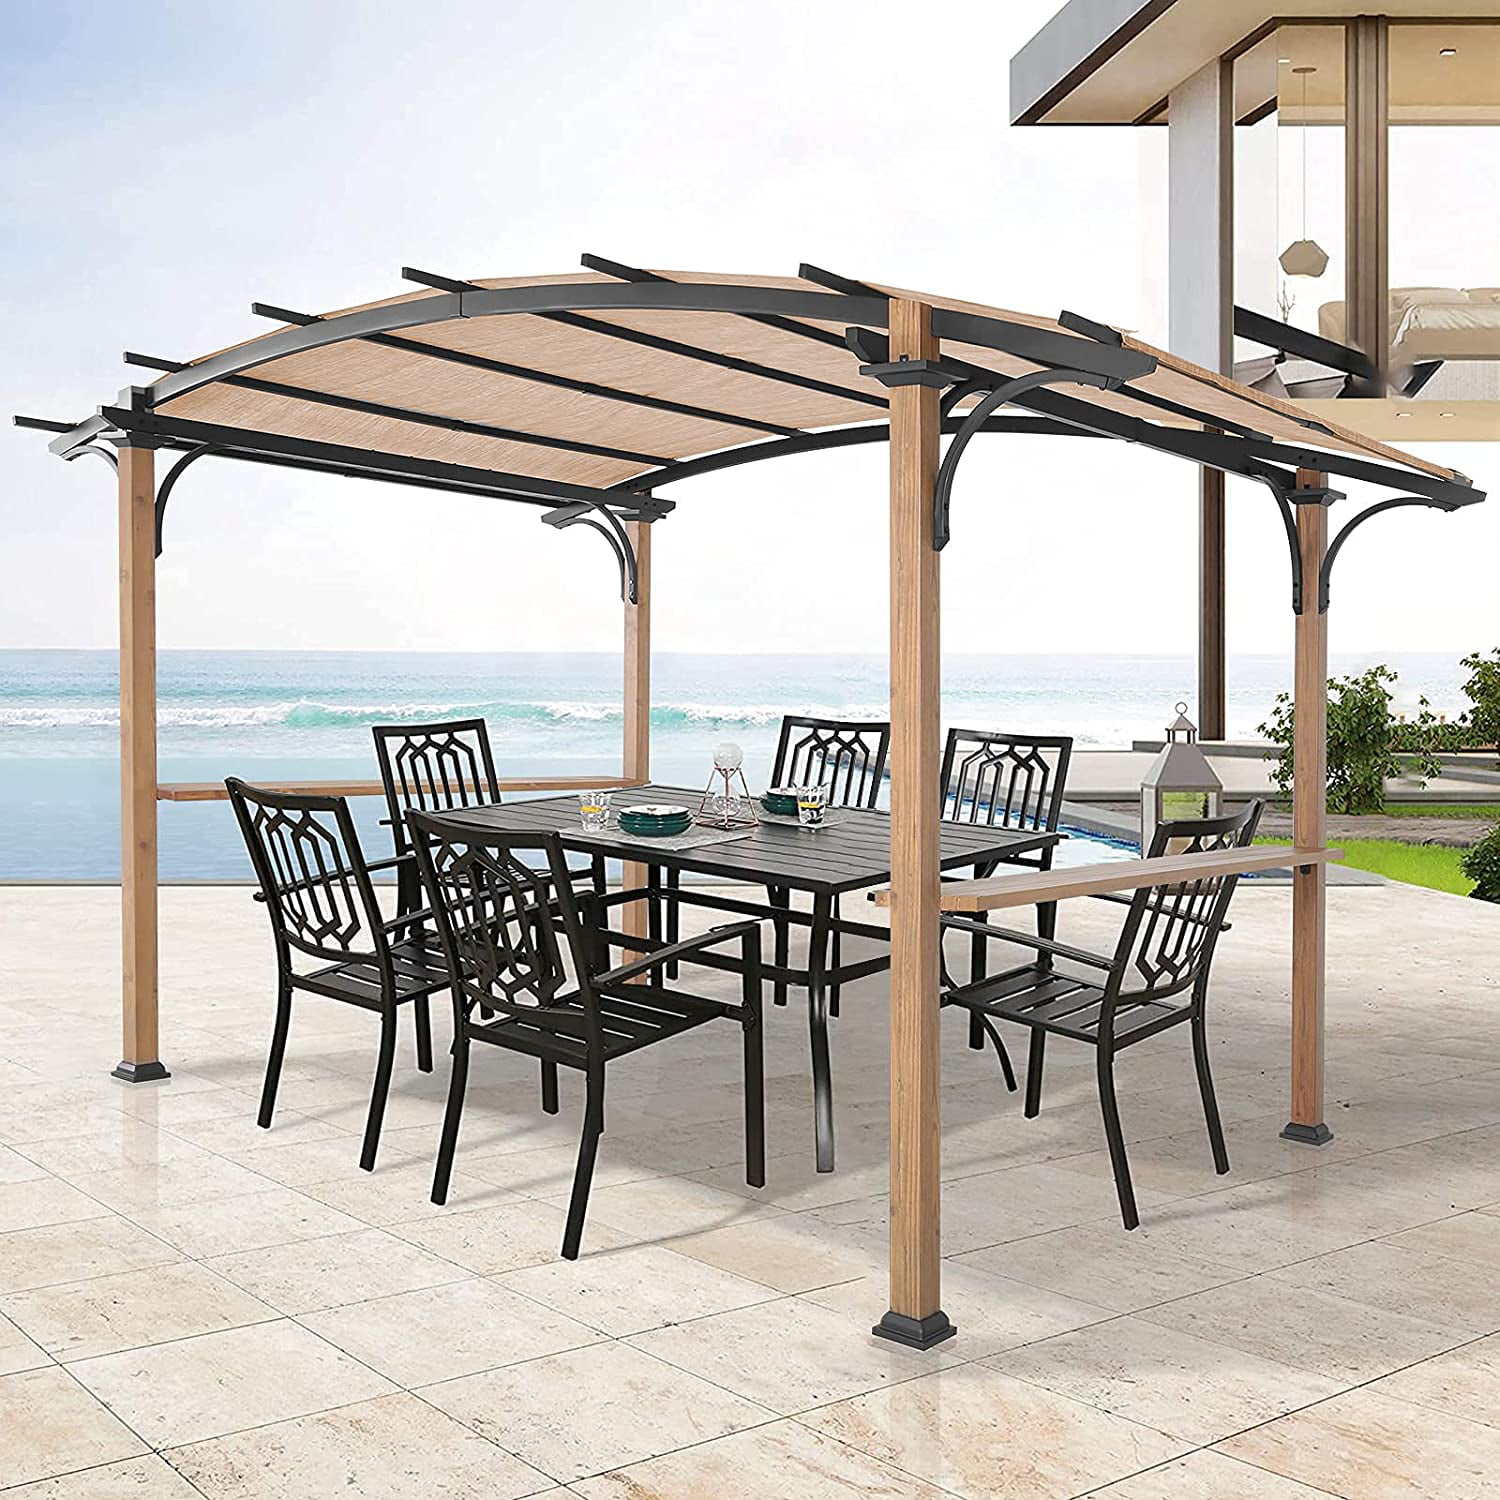 Yoleny Patio Pergola 8 5 Ft X 13 Steel Frame Arched Outdoor With Canopy Shades Wood Color Com - Outdoor Pergola Patio Canopy